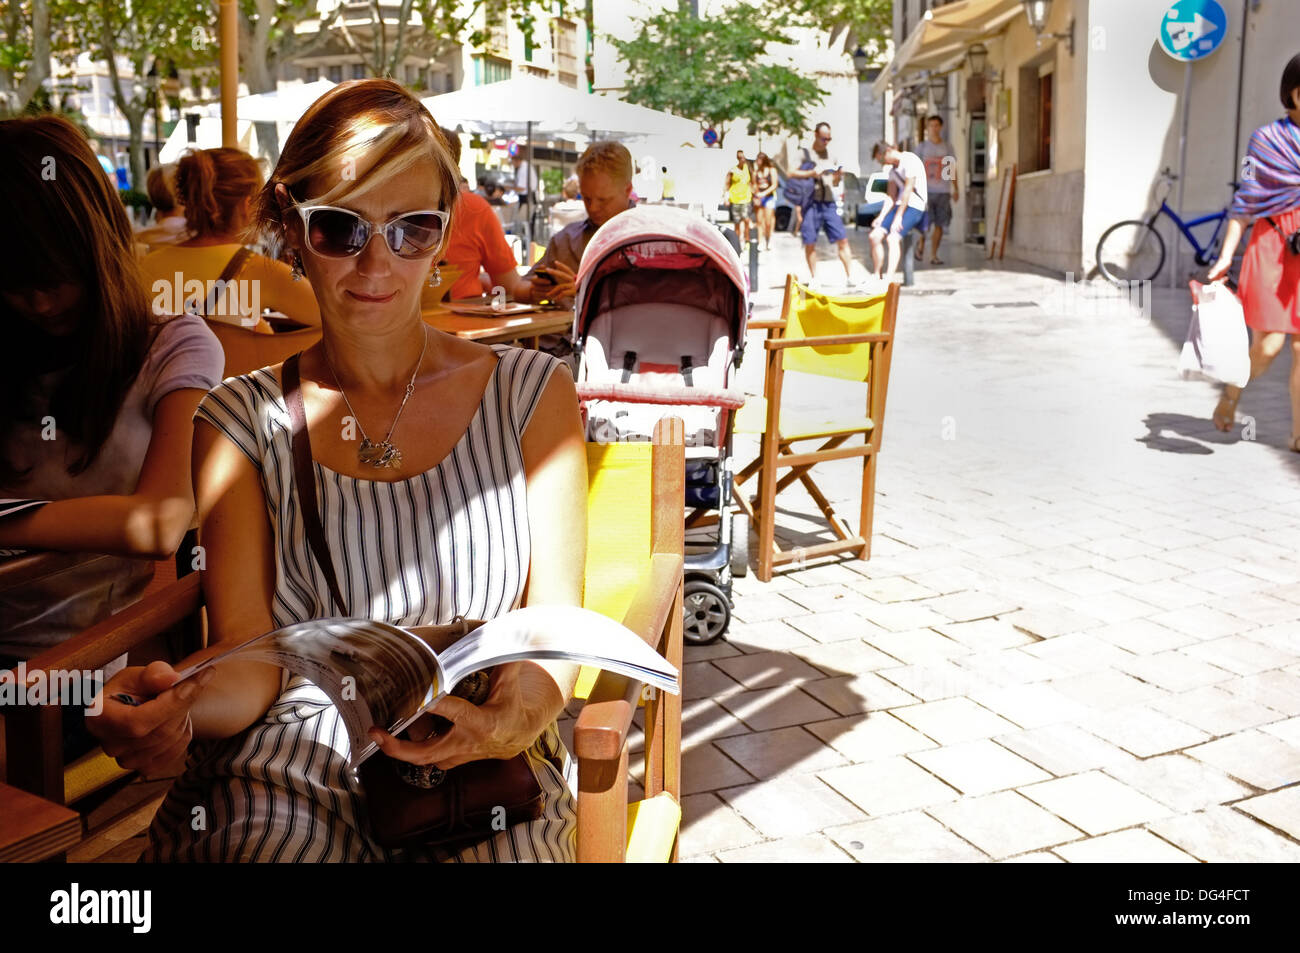 A middle-aged female tourist sitting in a cafe in Palma, Majorca Stock Photo